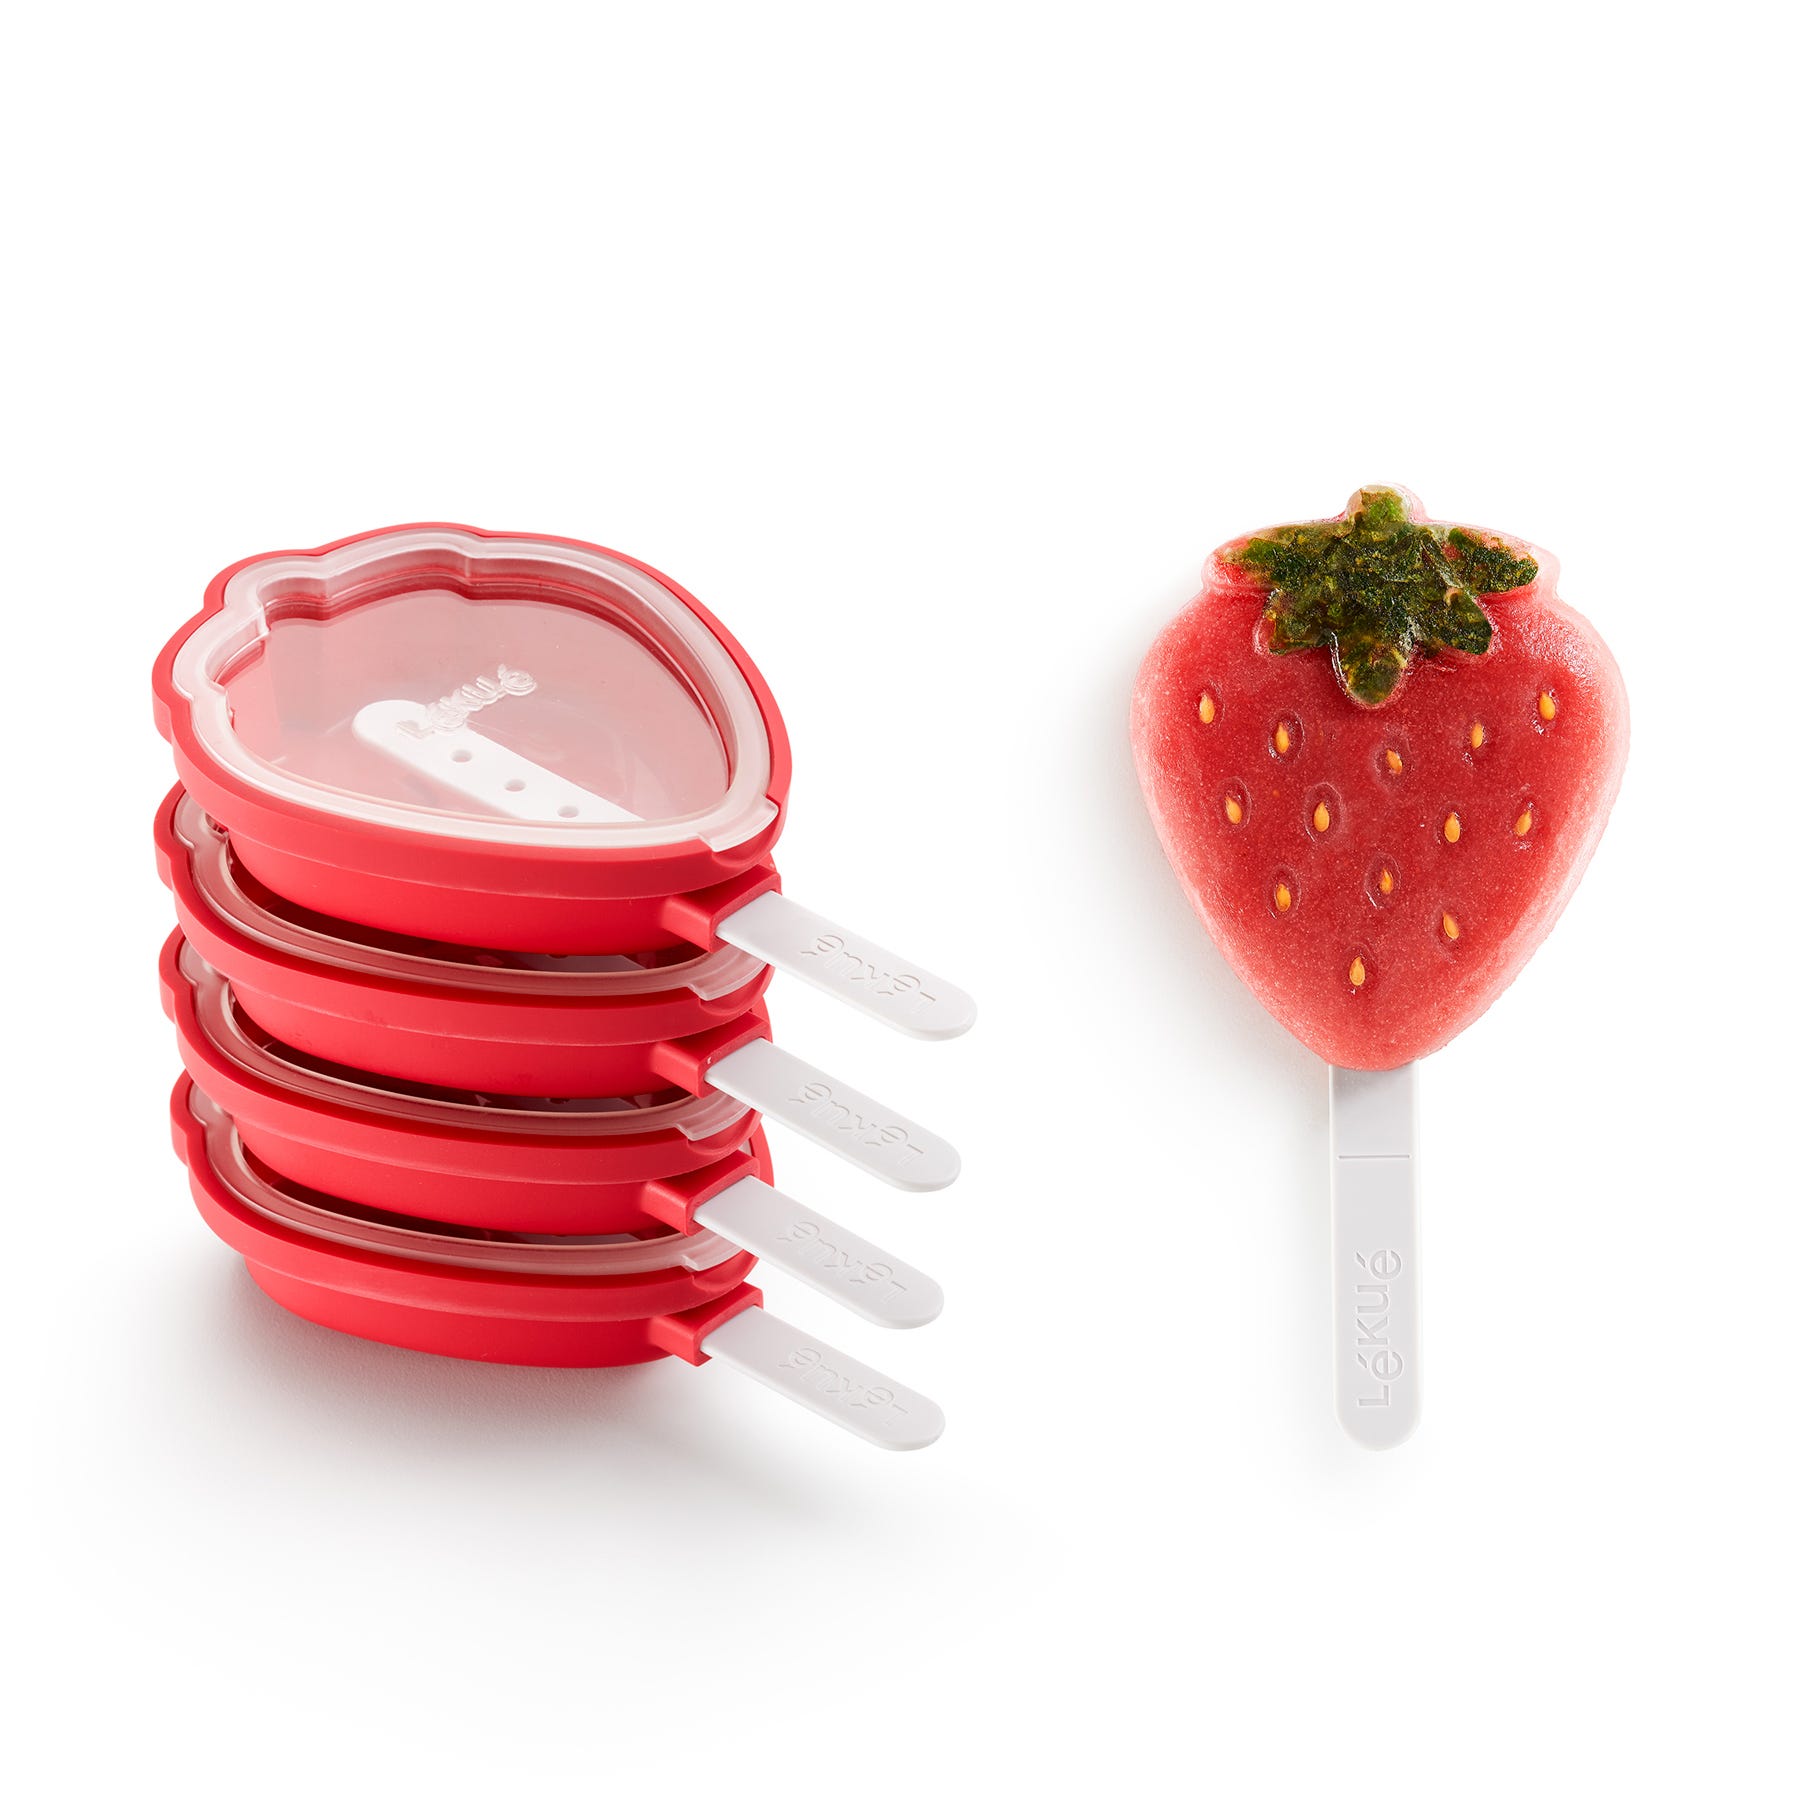 Silicone Red 15.4 x 9.4 x 3.3 cm Lékué Strawberry Popsicle Mould 